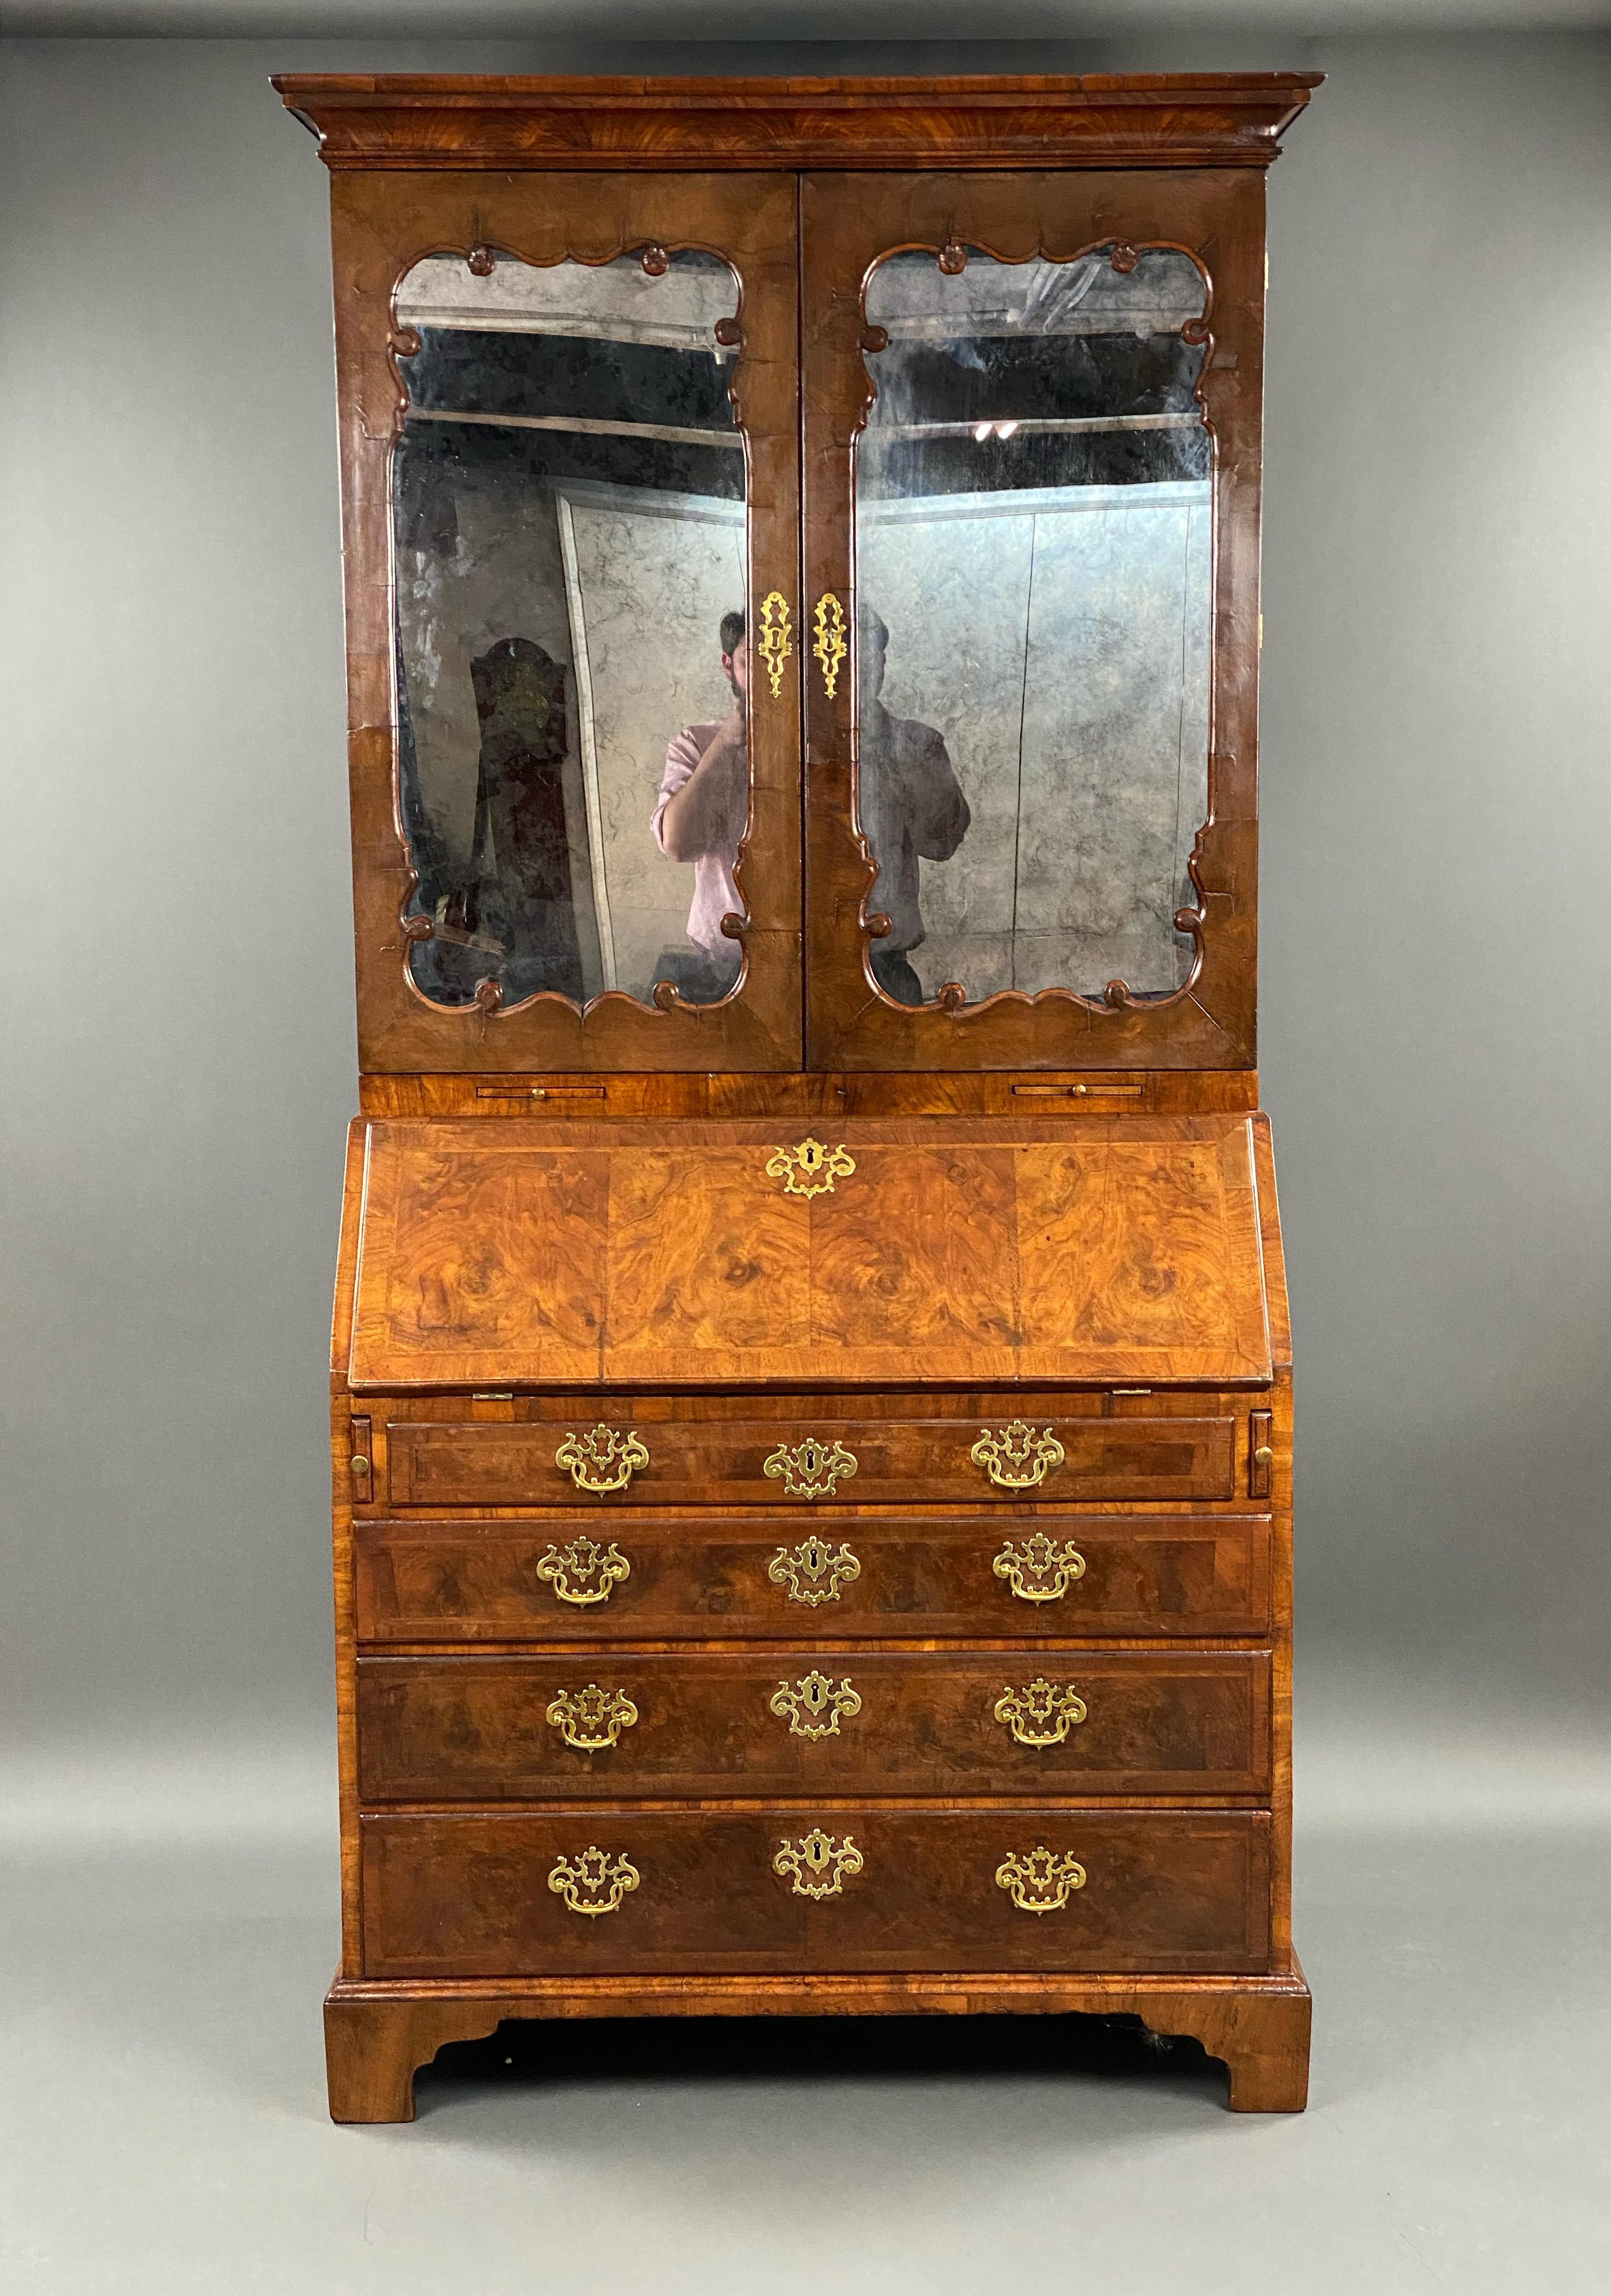 For sale is a fine quality 18th century English George II walnut secretary bookcase in the manner of Giles Grendey. The shaped mirrored panel doors opening to reveal a fully fitted interior comprising of pigeon holes, small drawers and a cupboard to